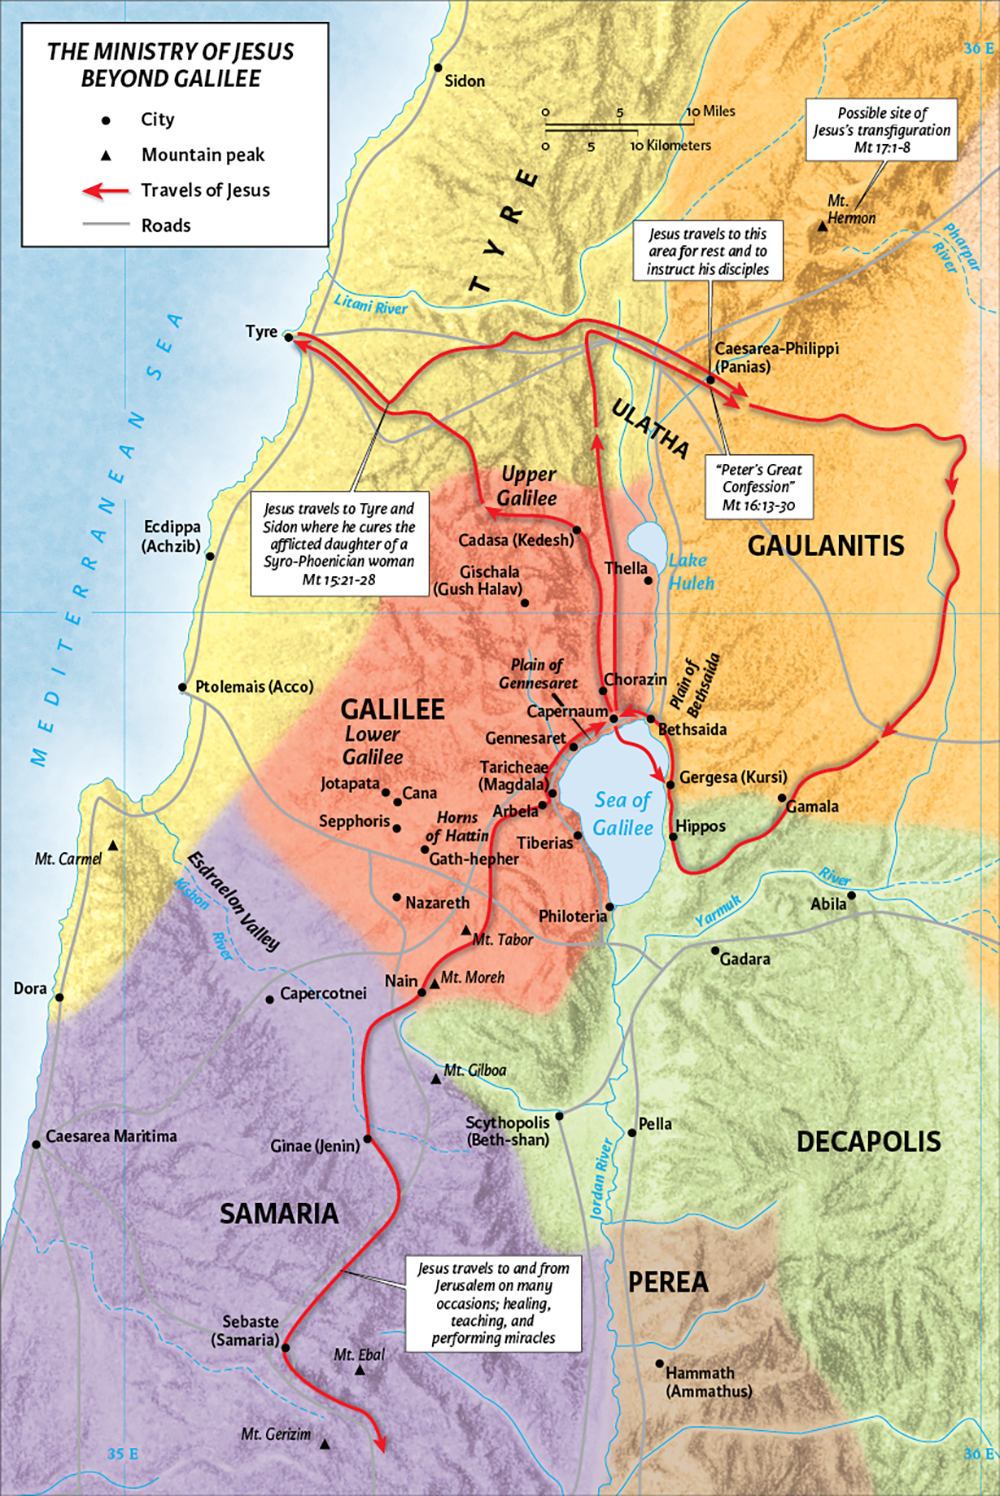 The Ministry of Jesus Beyond Galilee